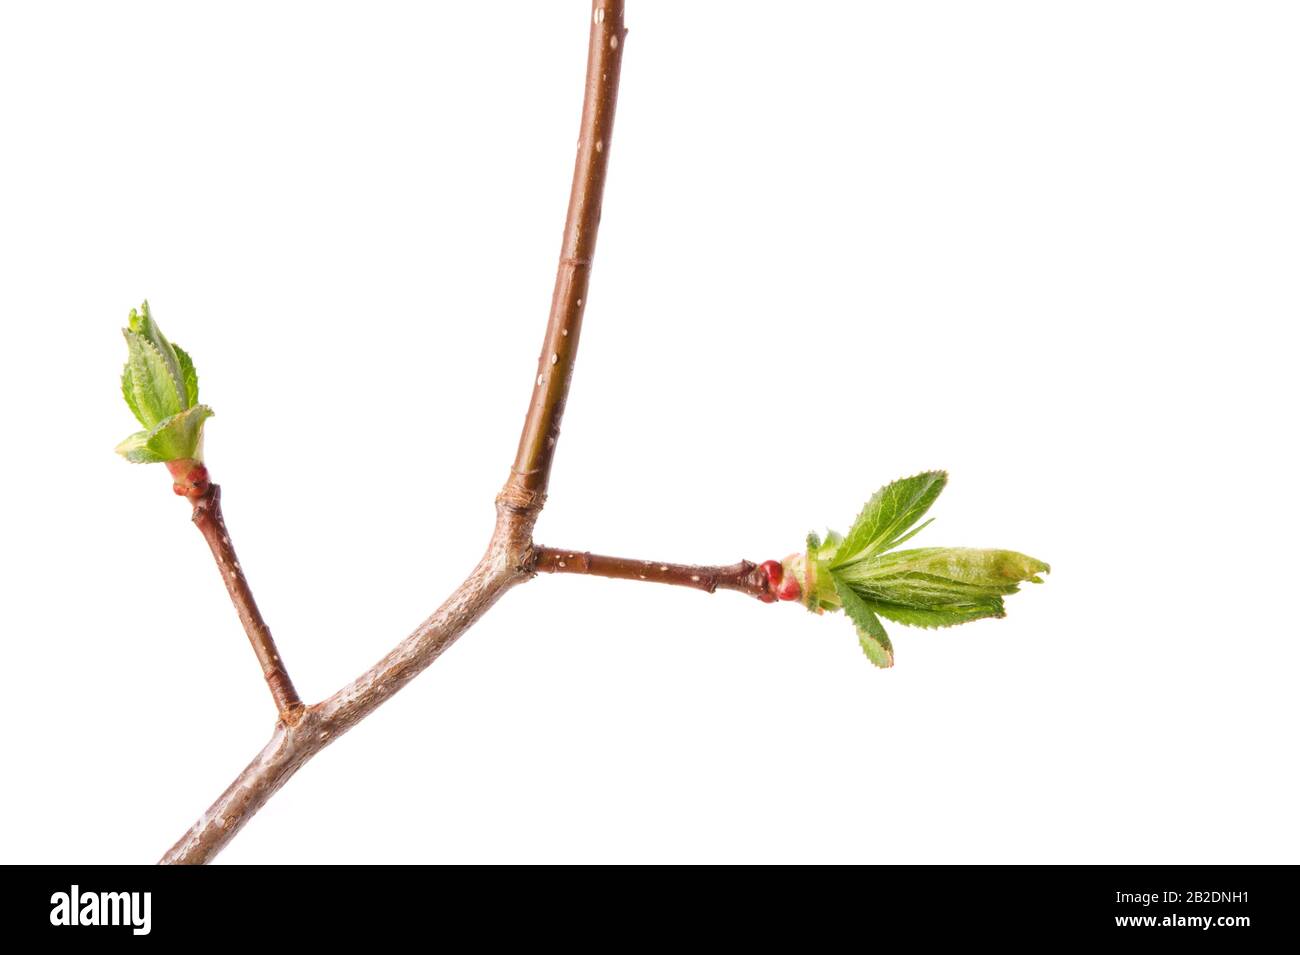 A spring branch of hawthorn (Crataegus) with budding leaves isolated on white. Stock Photo